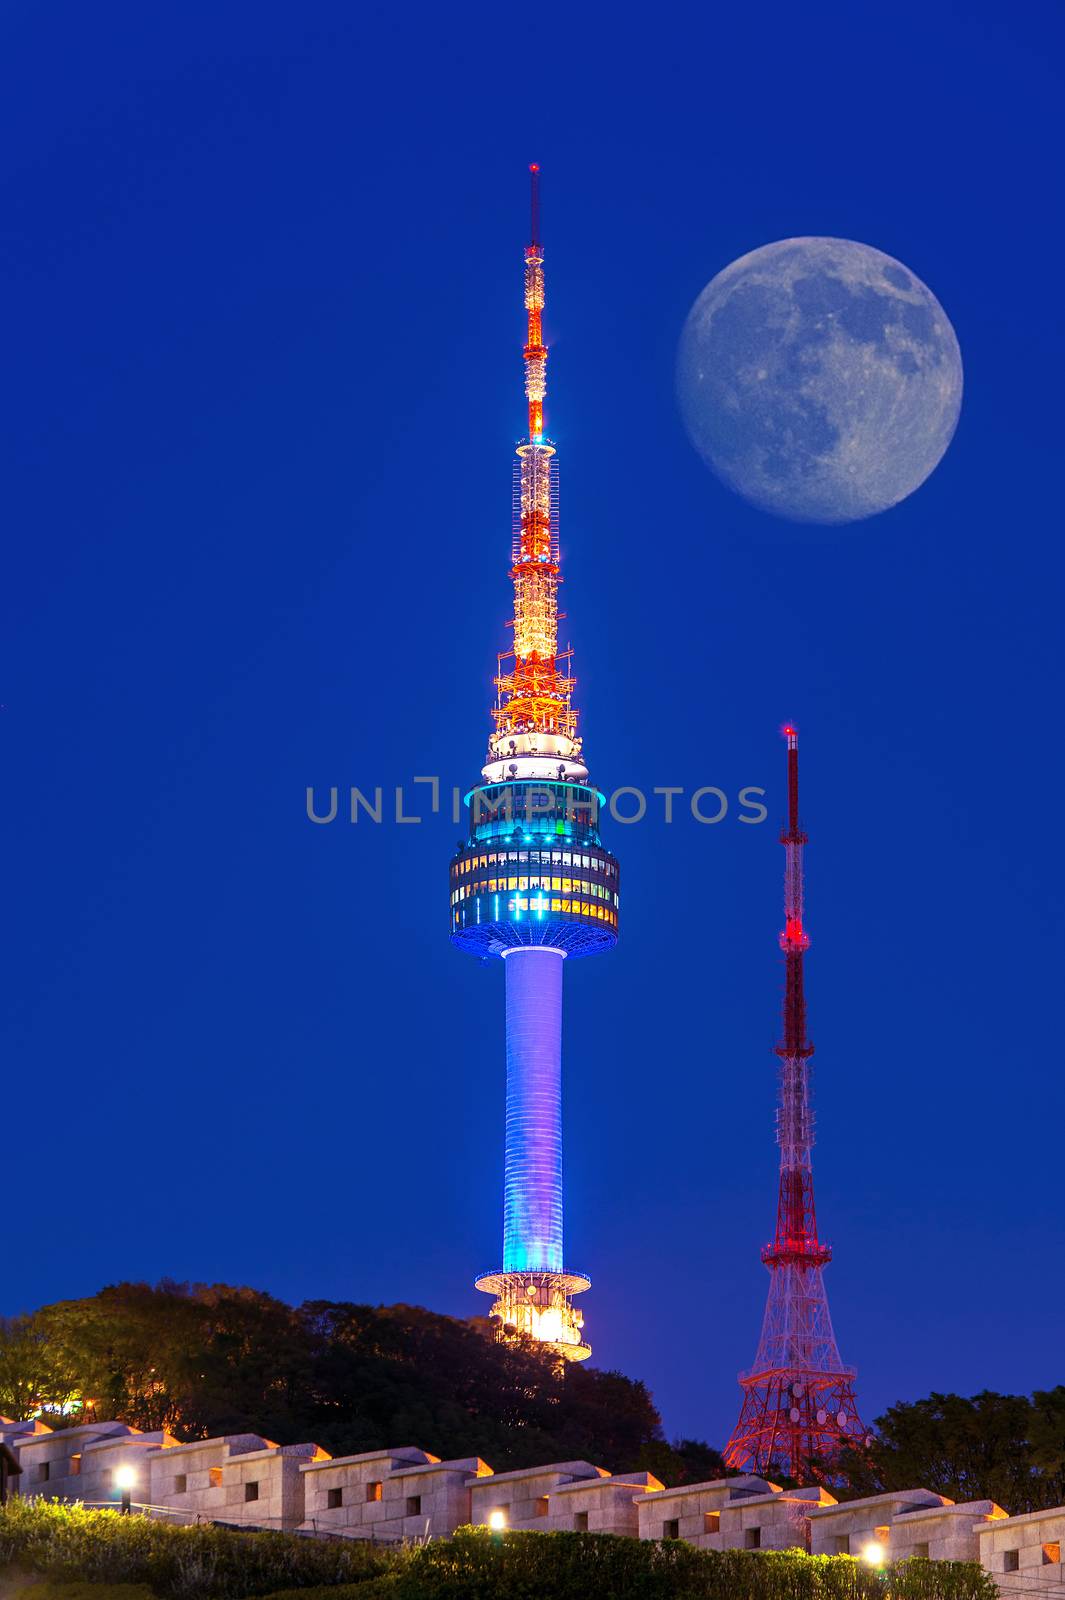 N Seoul Tower Located on Namsan Mountain in central Seoul,South Korea. by gutarphotoghaphy